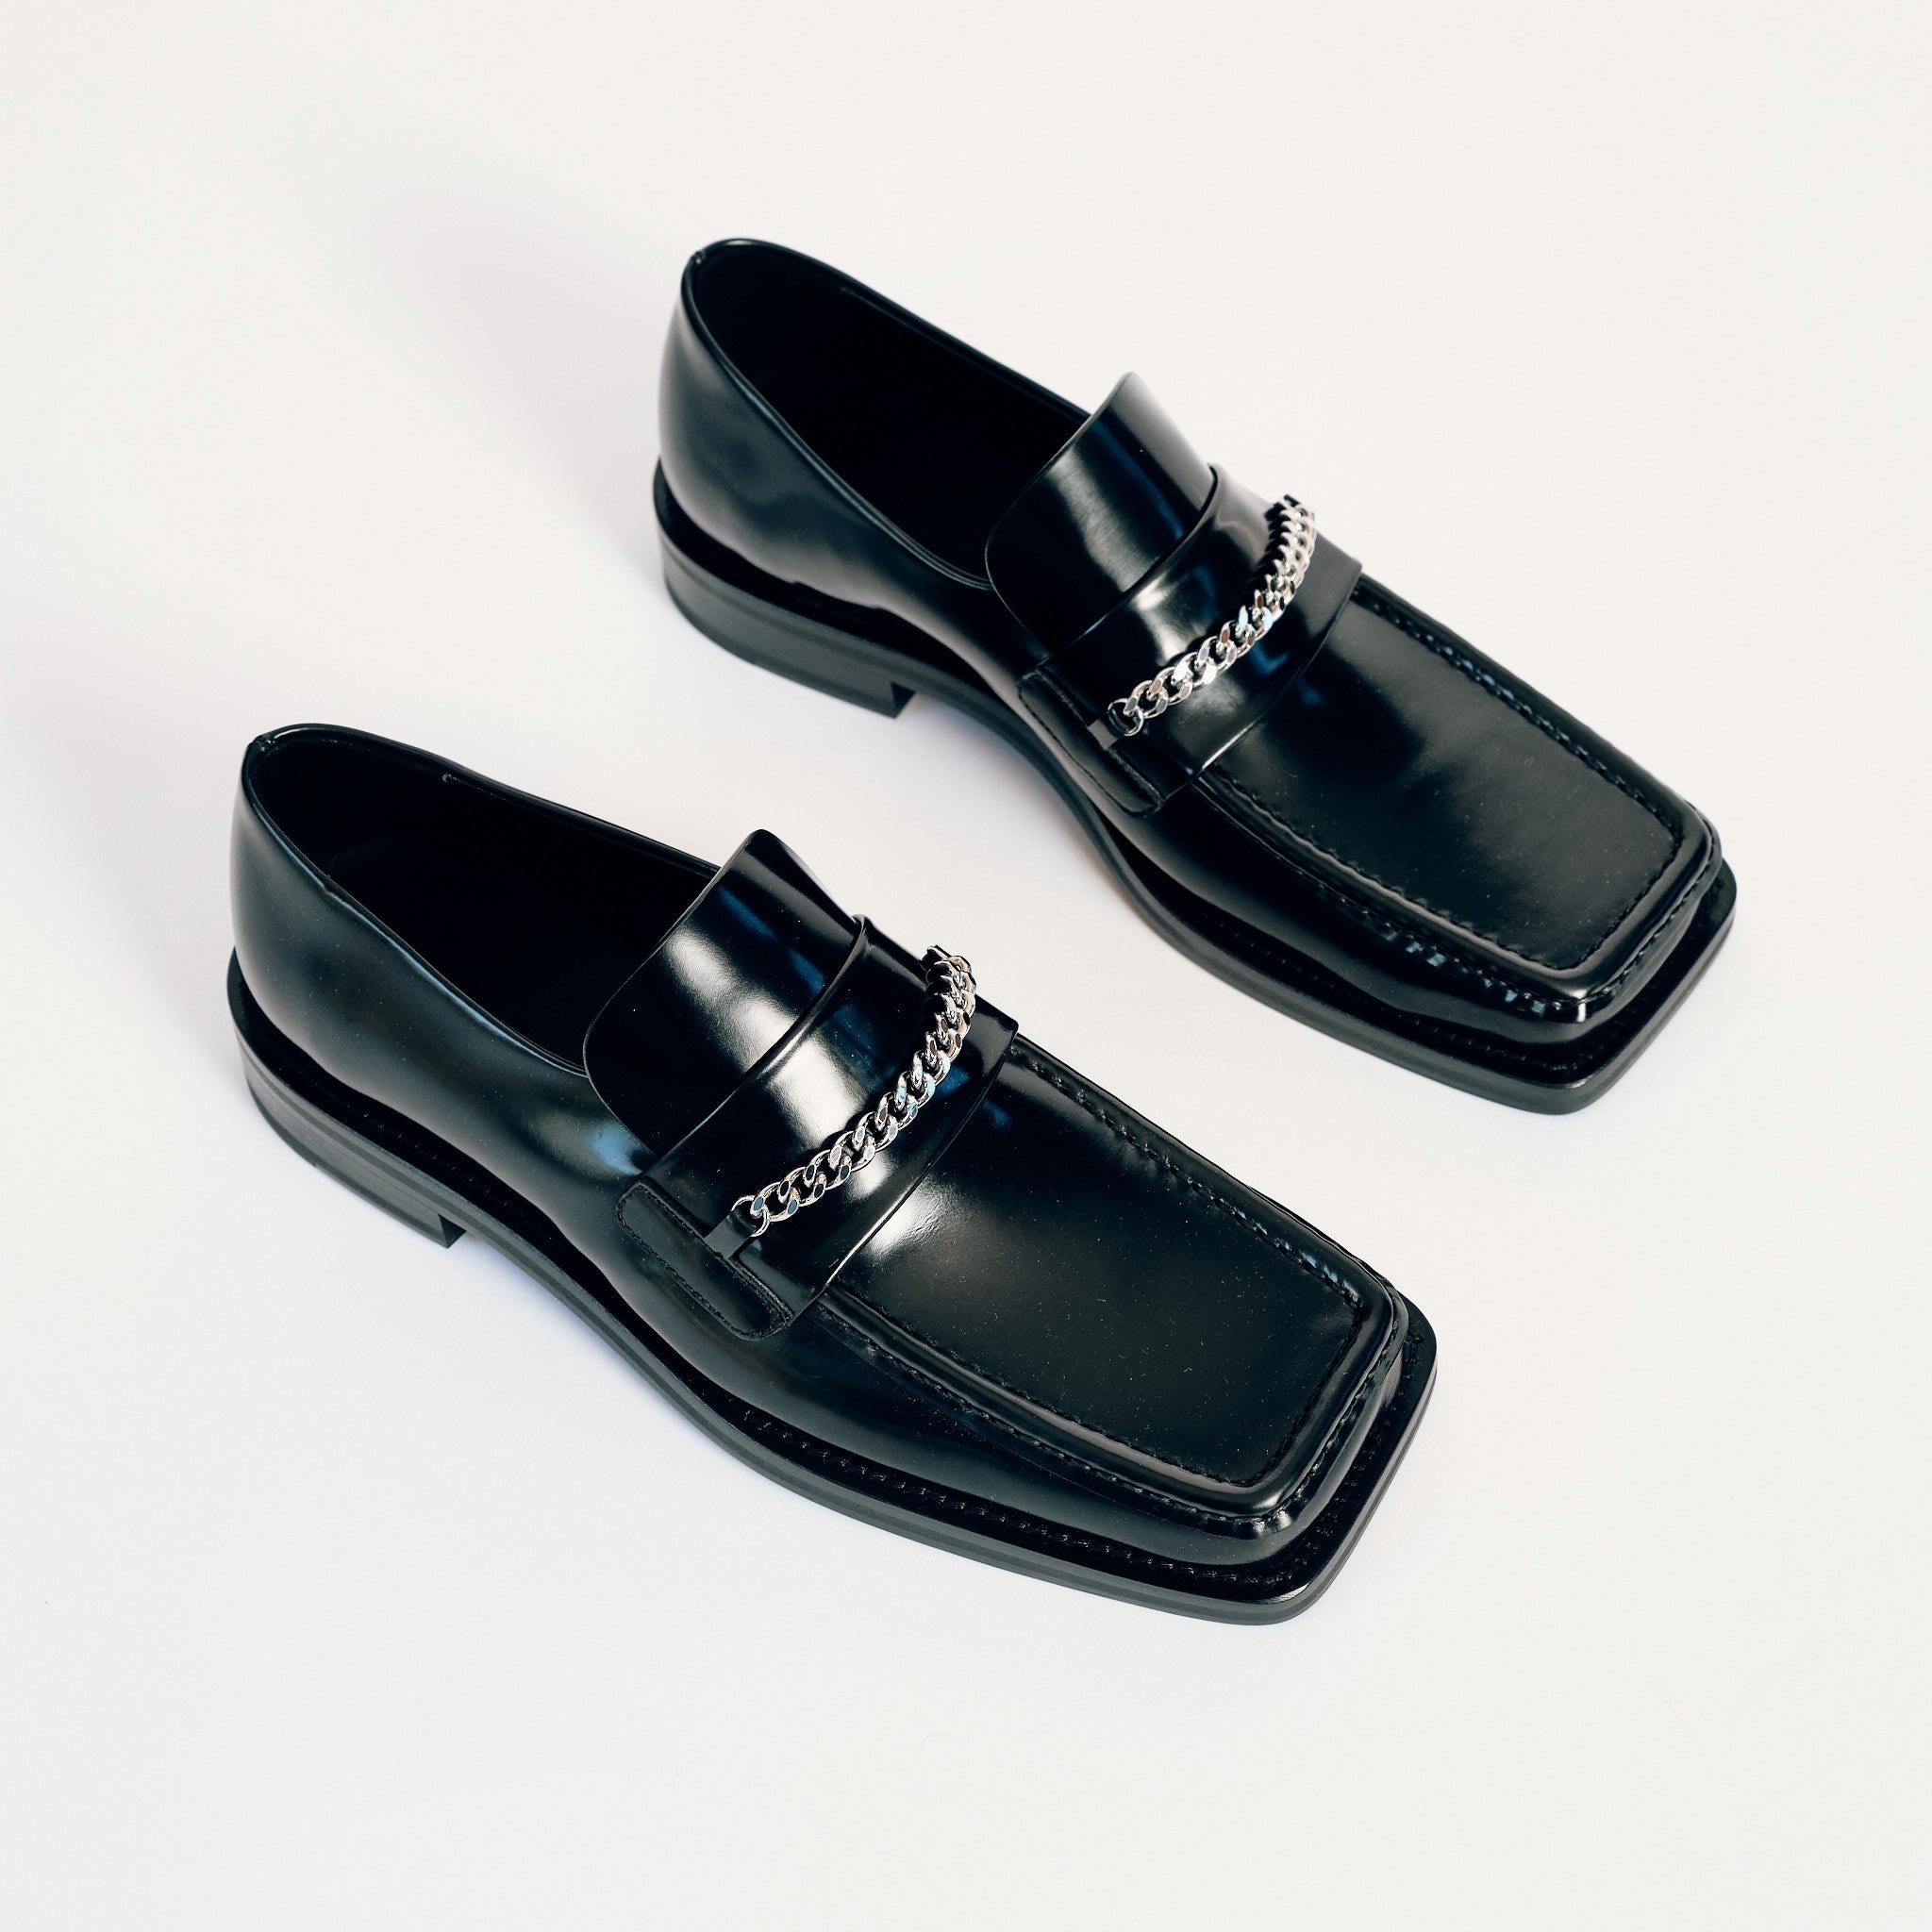 Martine Rose Square Toe Loafer in black shiny leather with a silver chain across the vamp - top view.